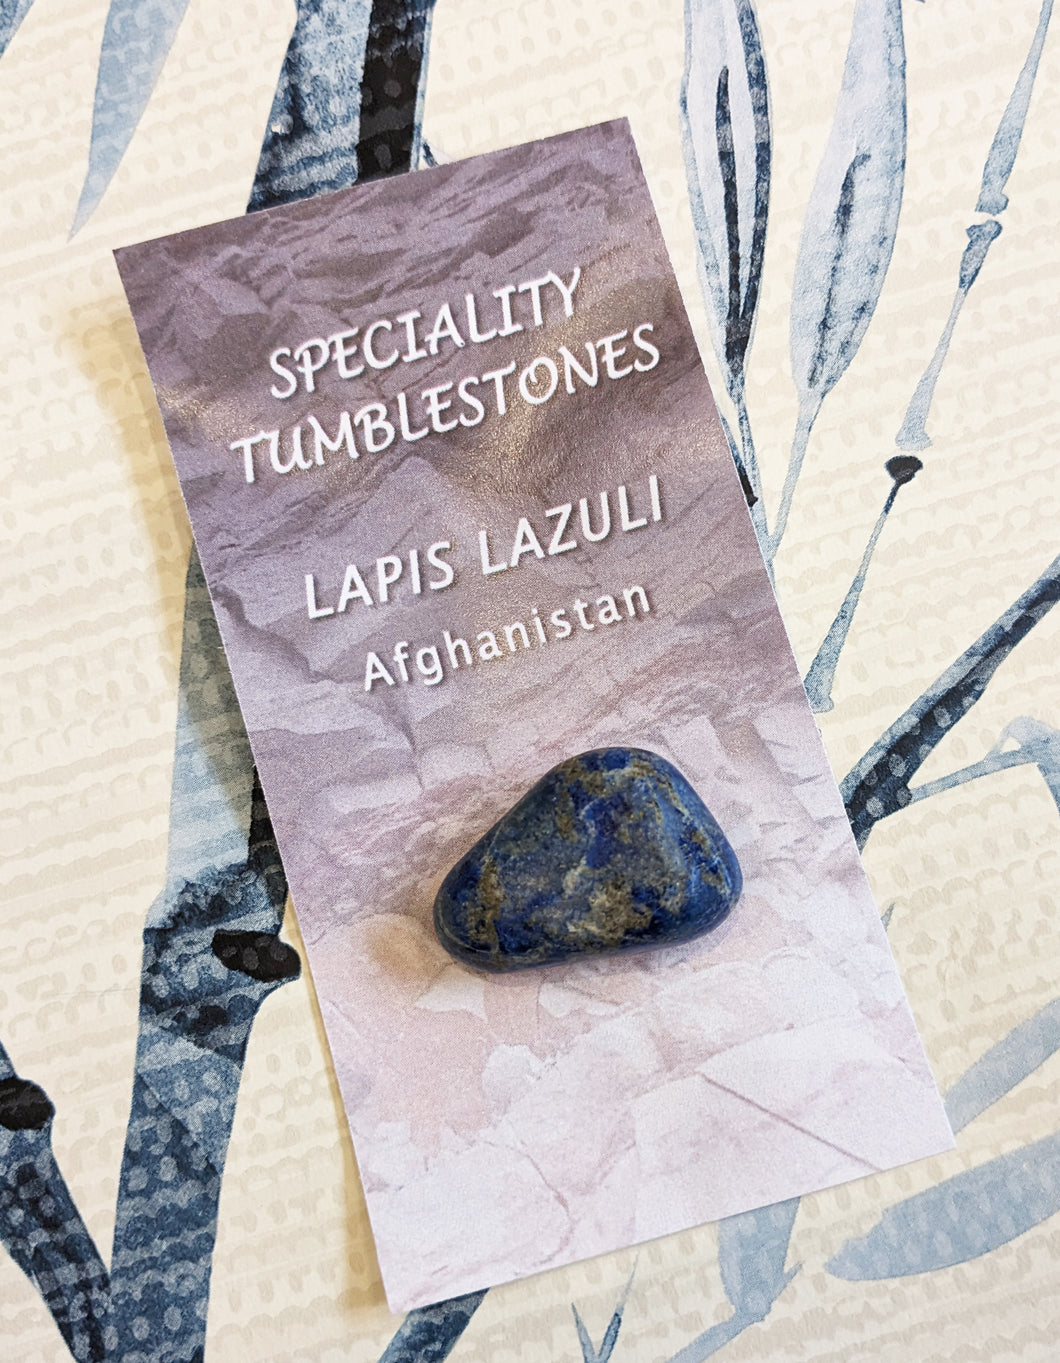 Tumbled Lapis Lazuli Crystal - for strength, courage, wisdom, intellect & truth